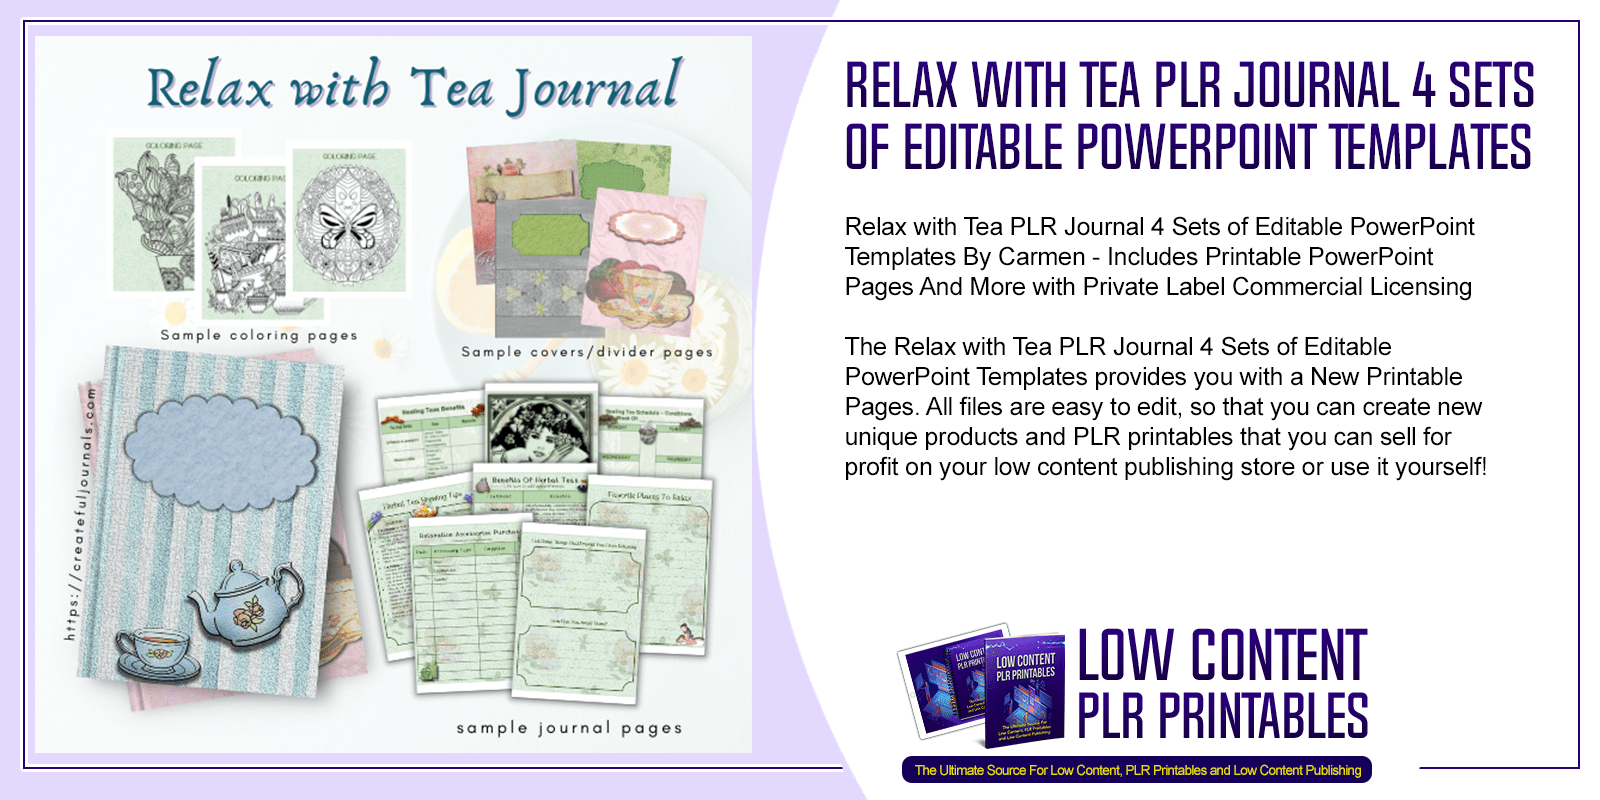 Relax with Tea PLR Journal 4 Sets of Editable PowerPoint Templates